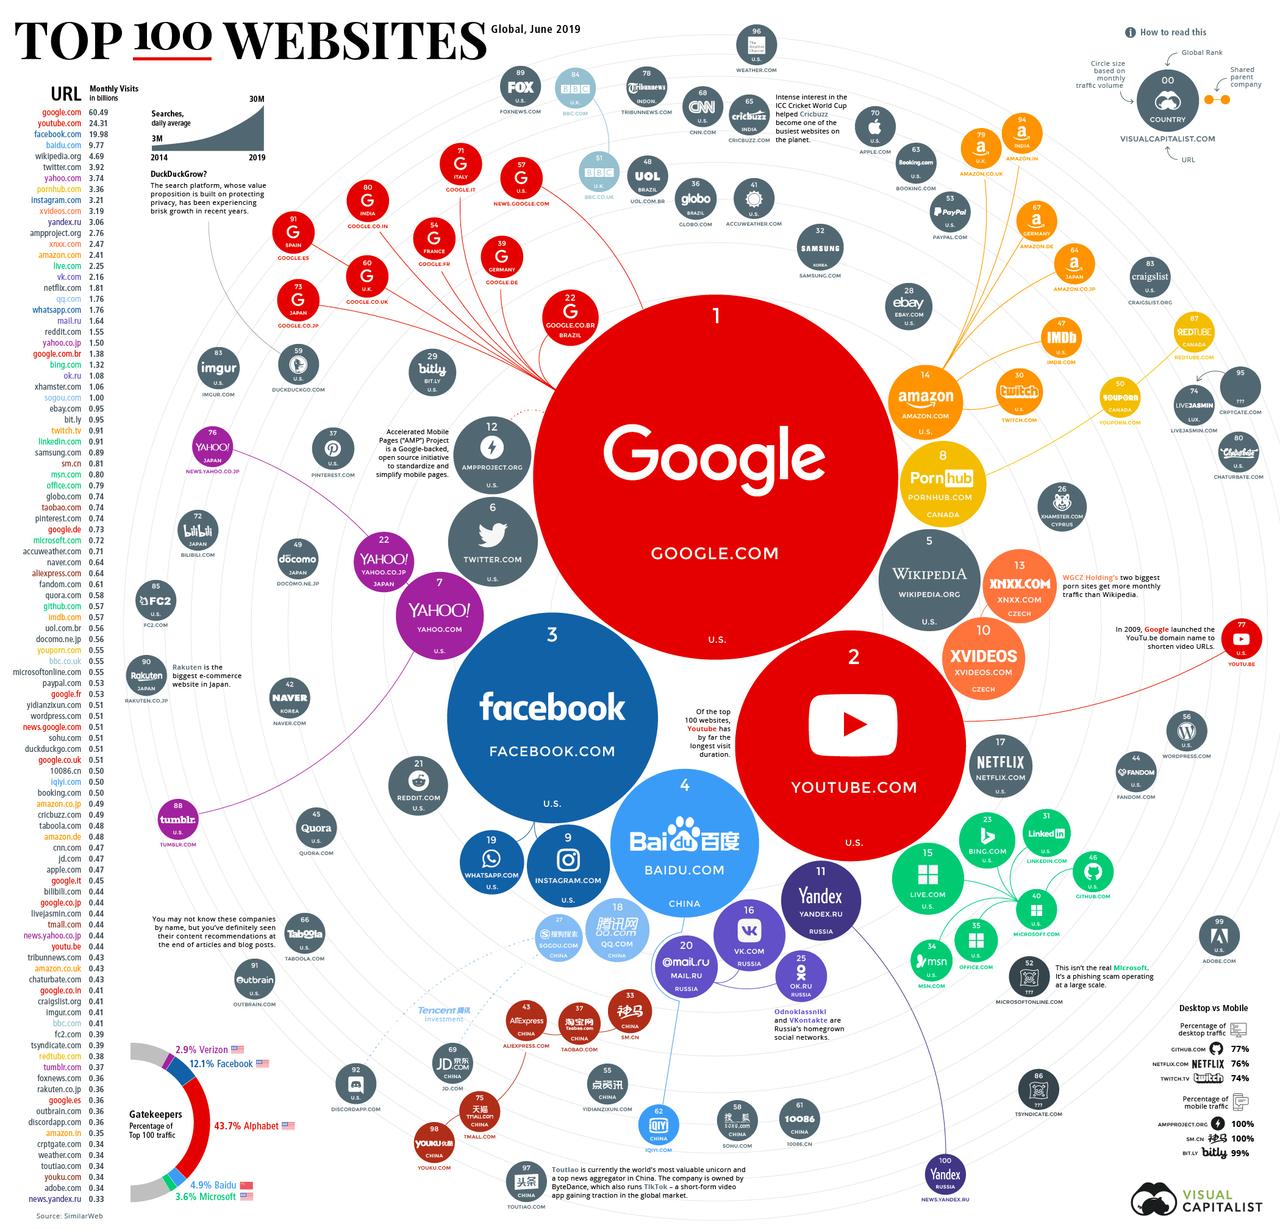 Ranking The Top 100 Websites In The World - News